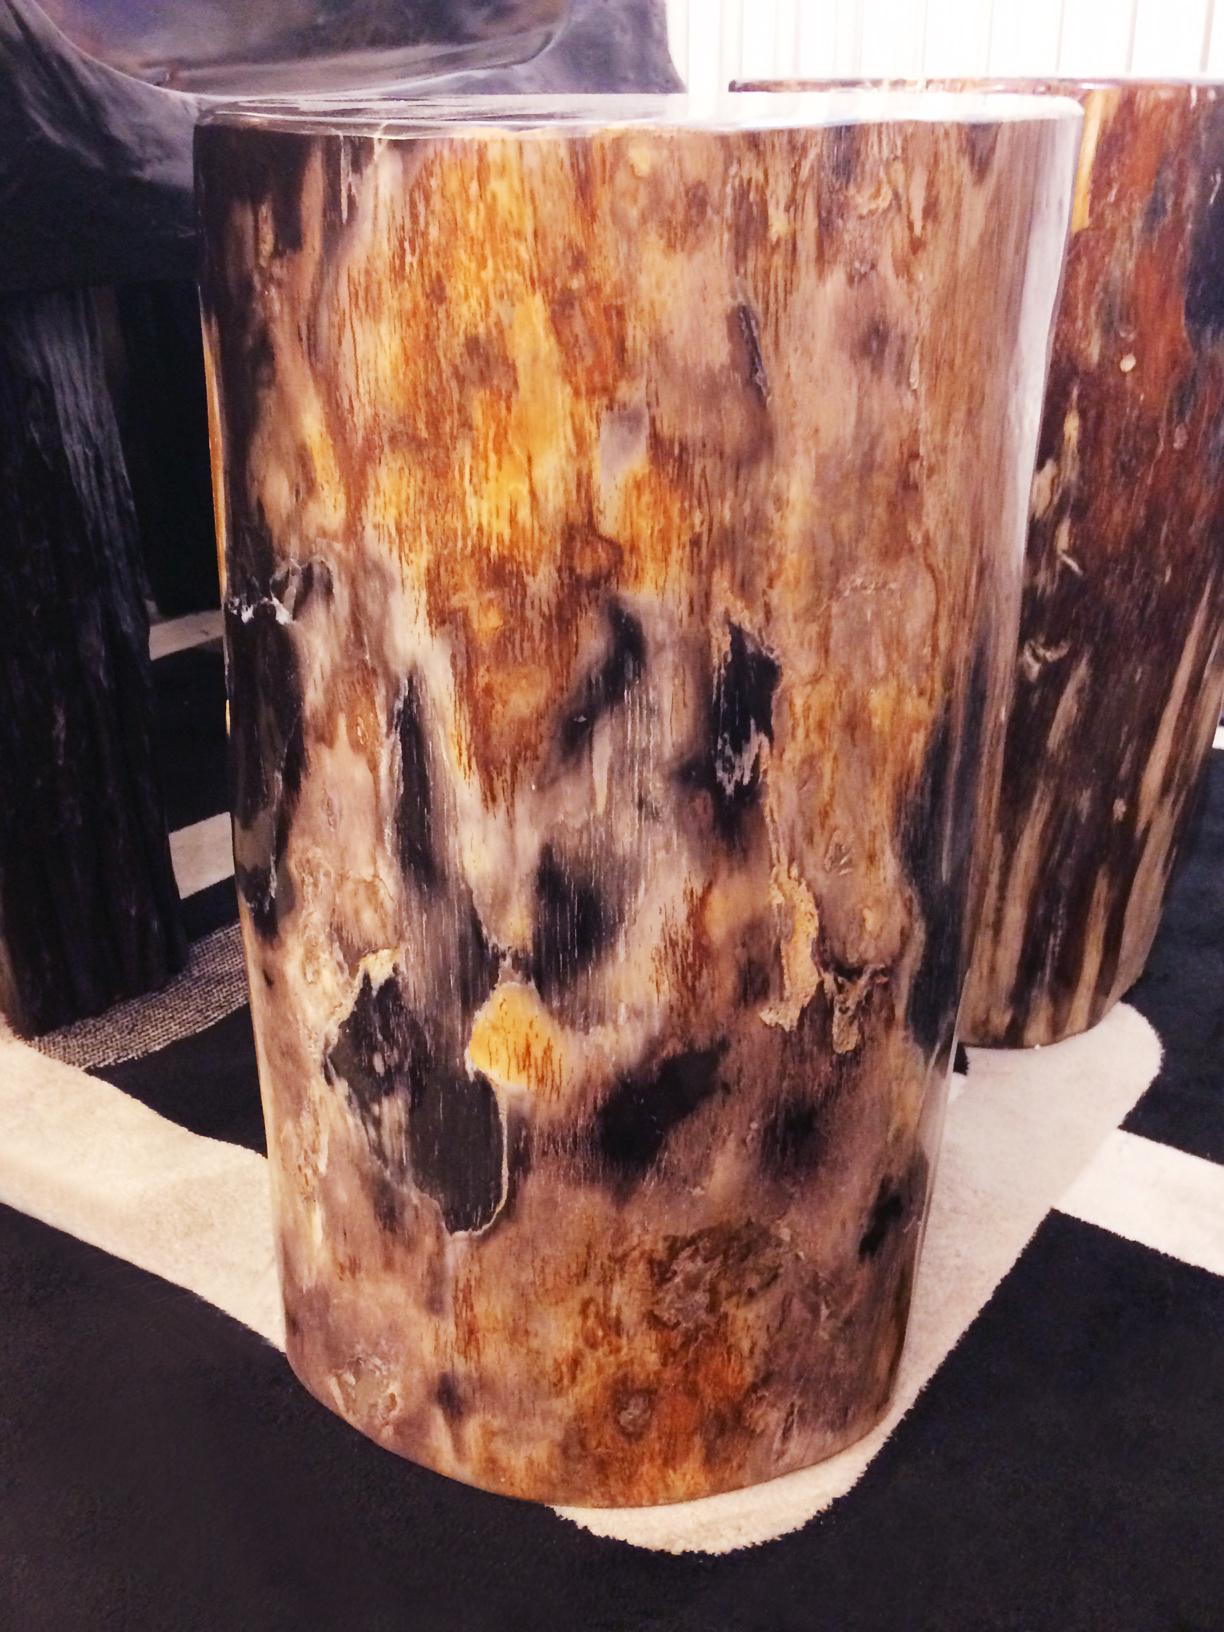 Side table petrified wood set of two n°D.
Set of two side table in solid petrified wood
from Indonesia. Petrified wood has turned
into stone. Trees have been buried for many 
years under sediment they transitioned into 
stone. Each piece is